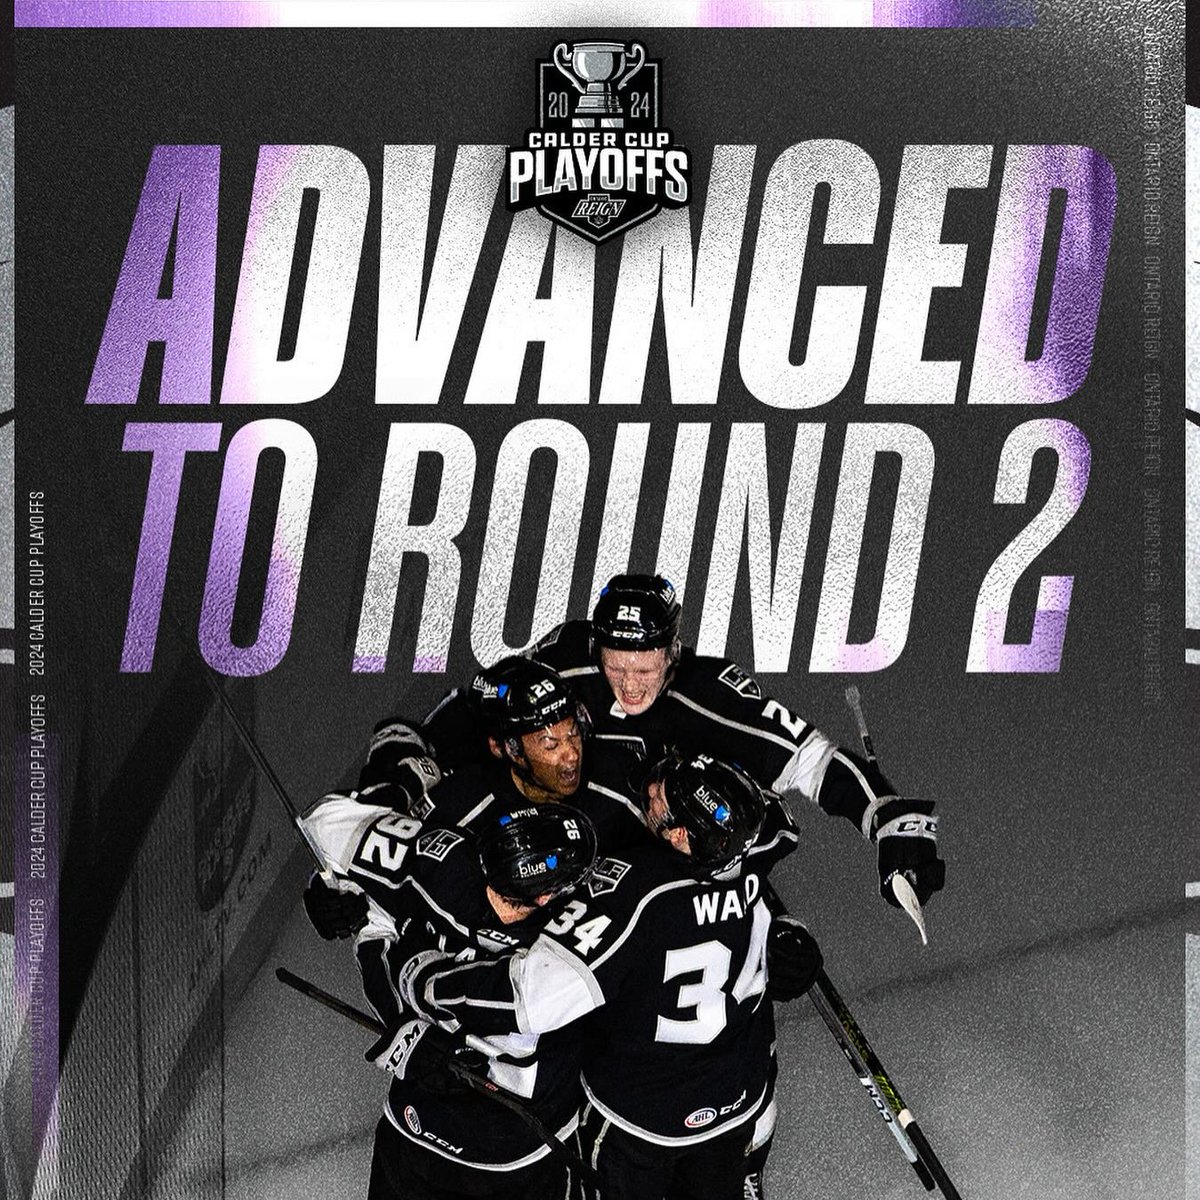 #FullSteamAhead to Round 2! 🚂 Cheer on @OntarioReign in the 2nd round of the 2024 Calder Cup Playoffs against the Abbotsford Canucks at @ToyotaArena! 🏆

📆 Game 1 - Wed. May 1 | 7PM
📆 Game 2 - Sun. May 5 | 3PM

TICKETS 👉 ONTARIOREIGN.COM & TOYOTA-ARENA.COM